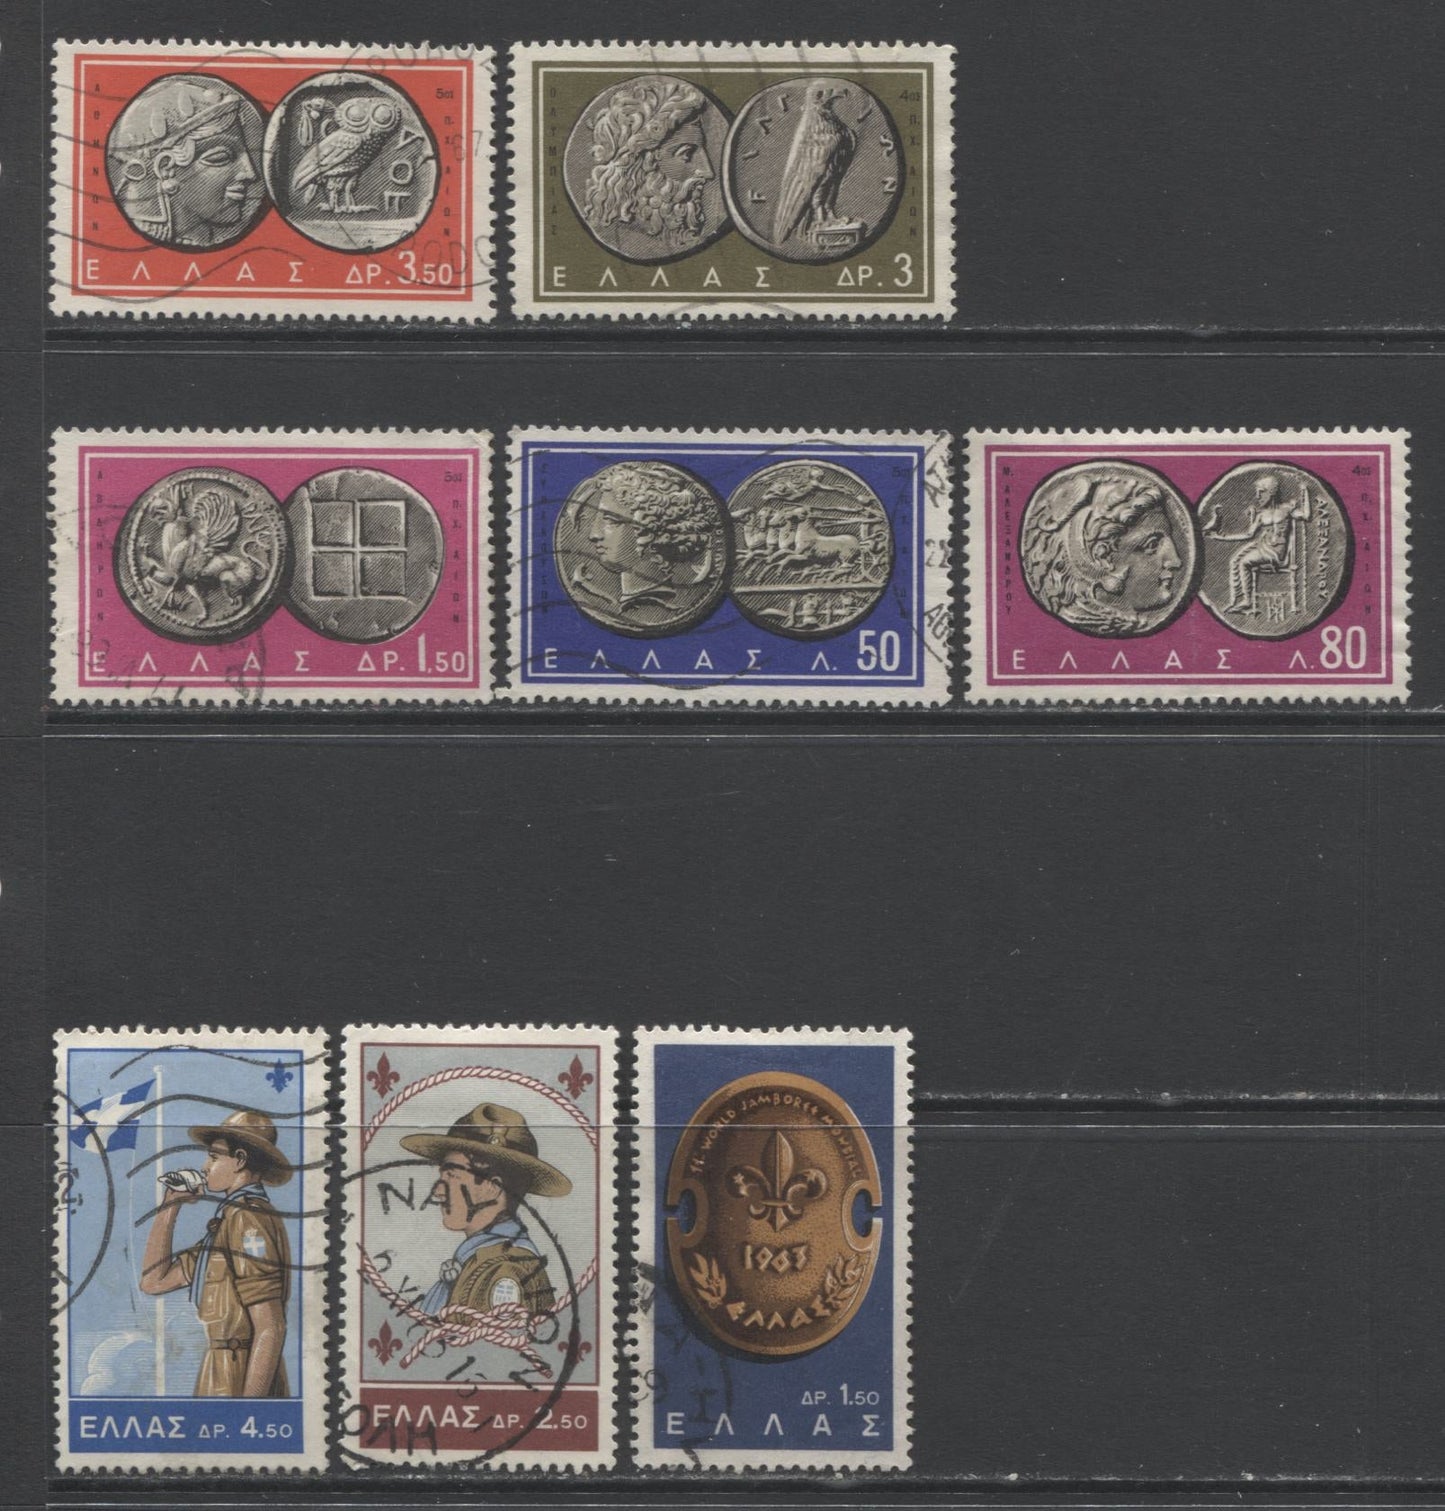 Lot 166 Greece SC#750-787 1963-1964 Definitives & Commemoratives, A F/VFOG & Used Range Of Singles, 2017 Scott Cat. $13.4 USD, Click on Listing to See ALL Pictures